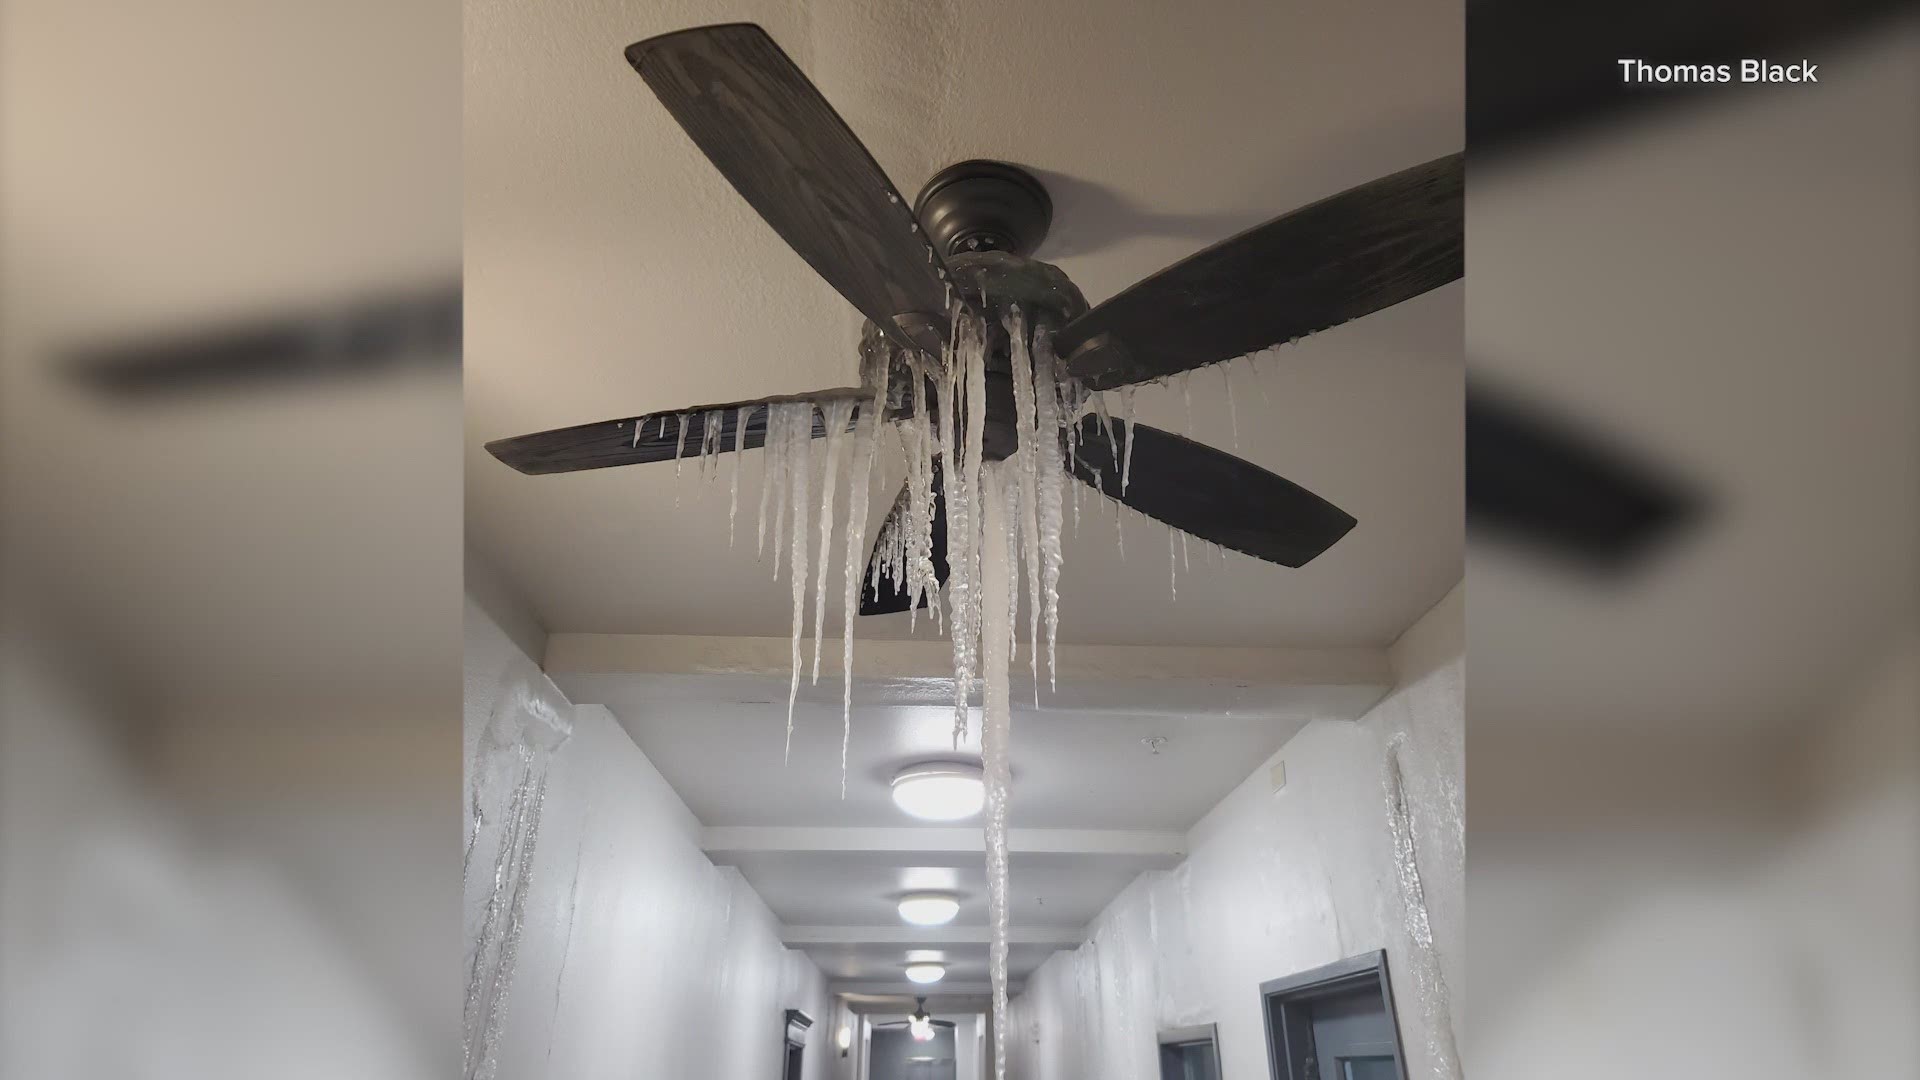 Photo of ice-covered ceiling fan goes viral during Texas winter storm. eSports mogul and Texas native Mike Rufail took notice and has pledged to offer help.